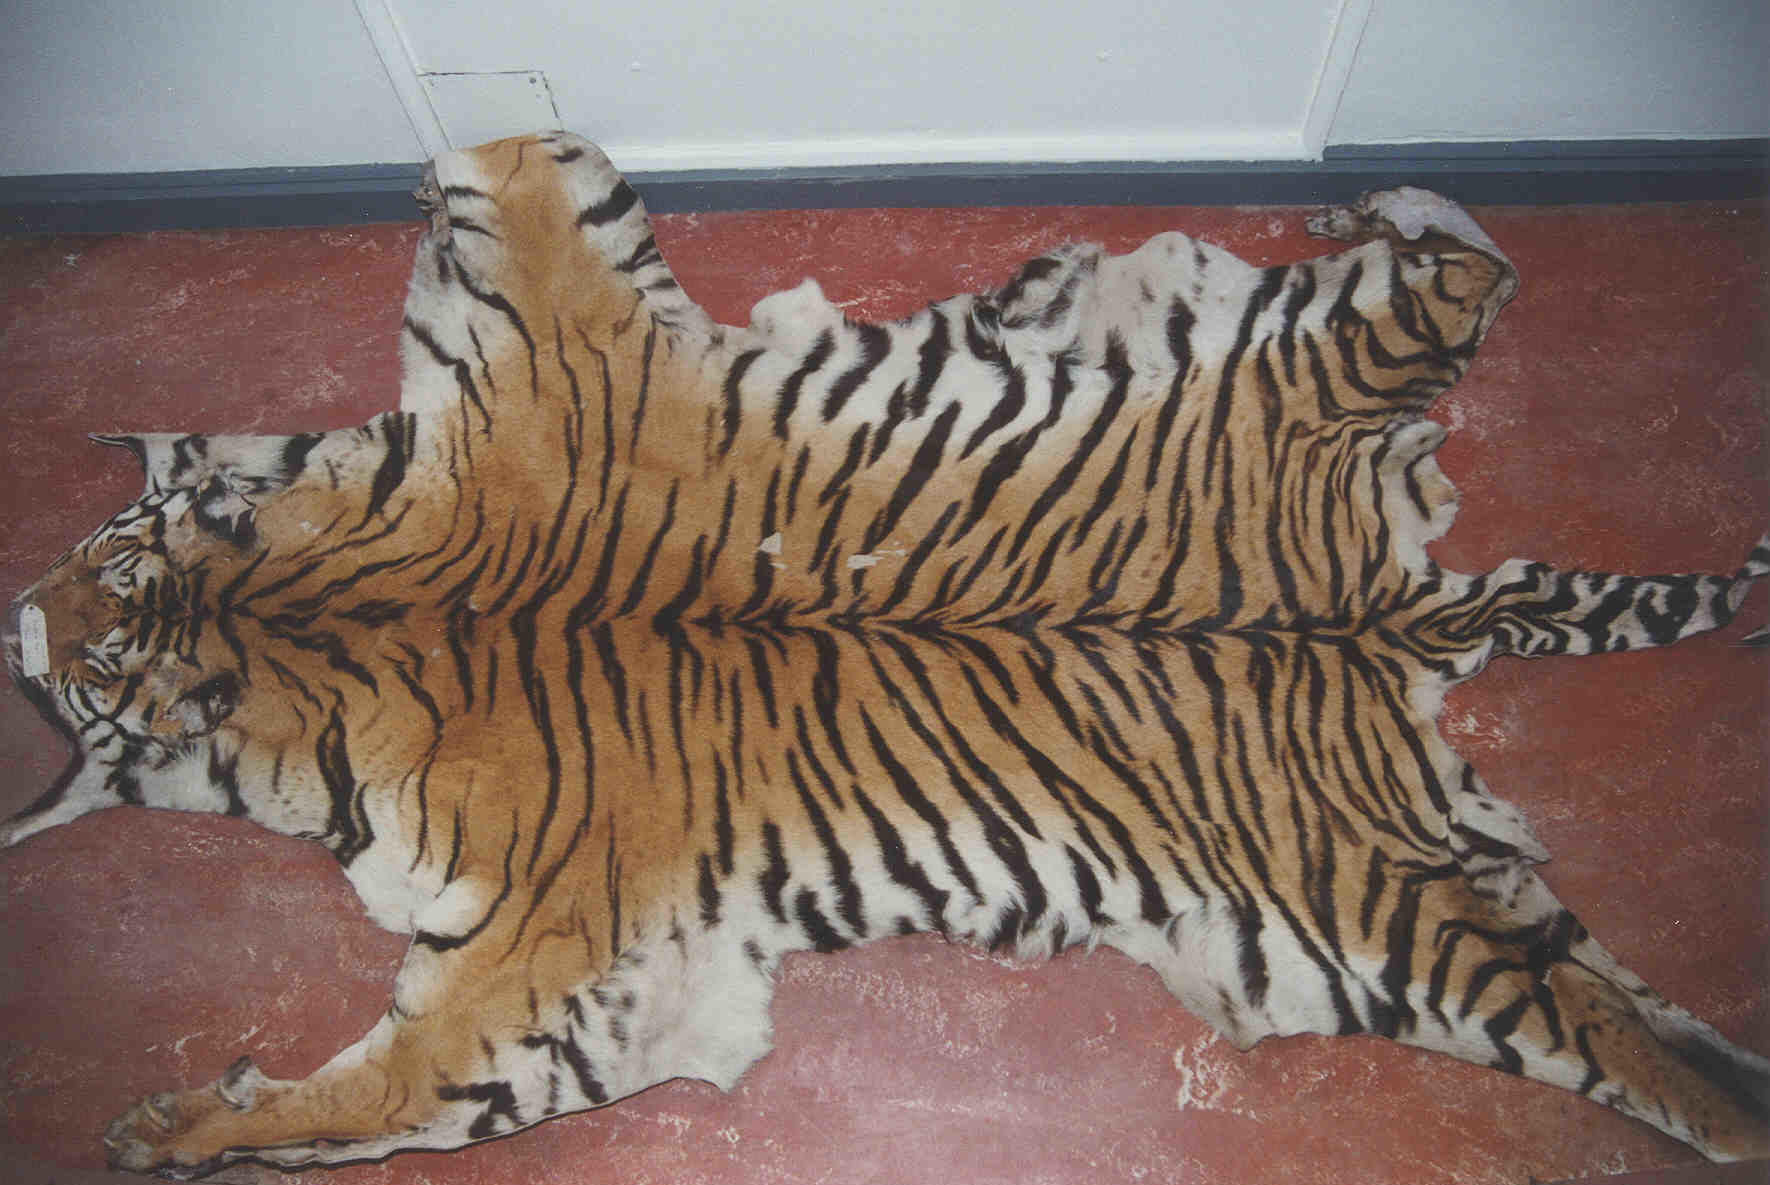 A confiscated tiger skin